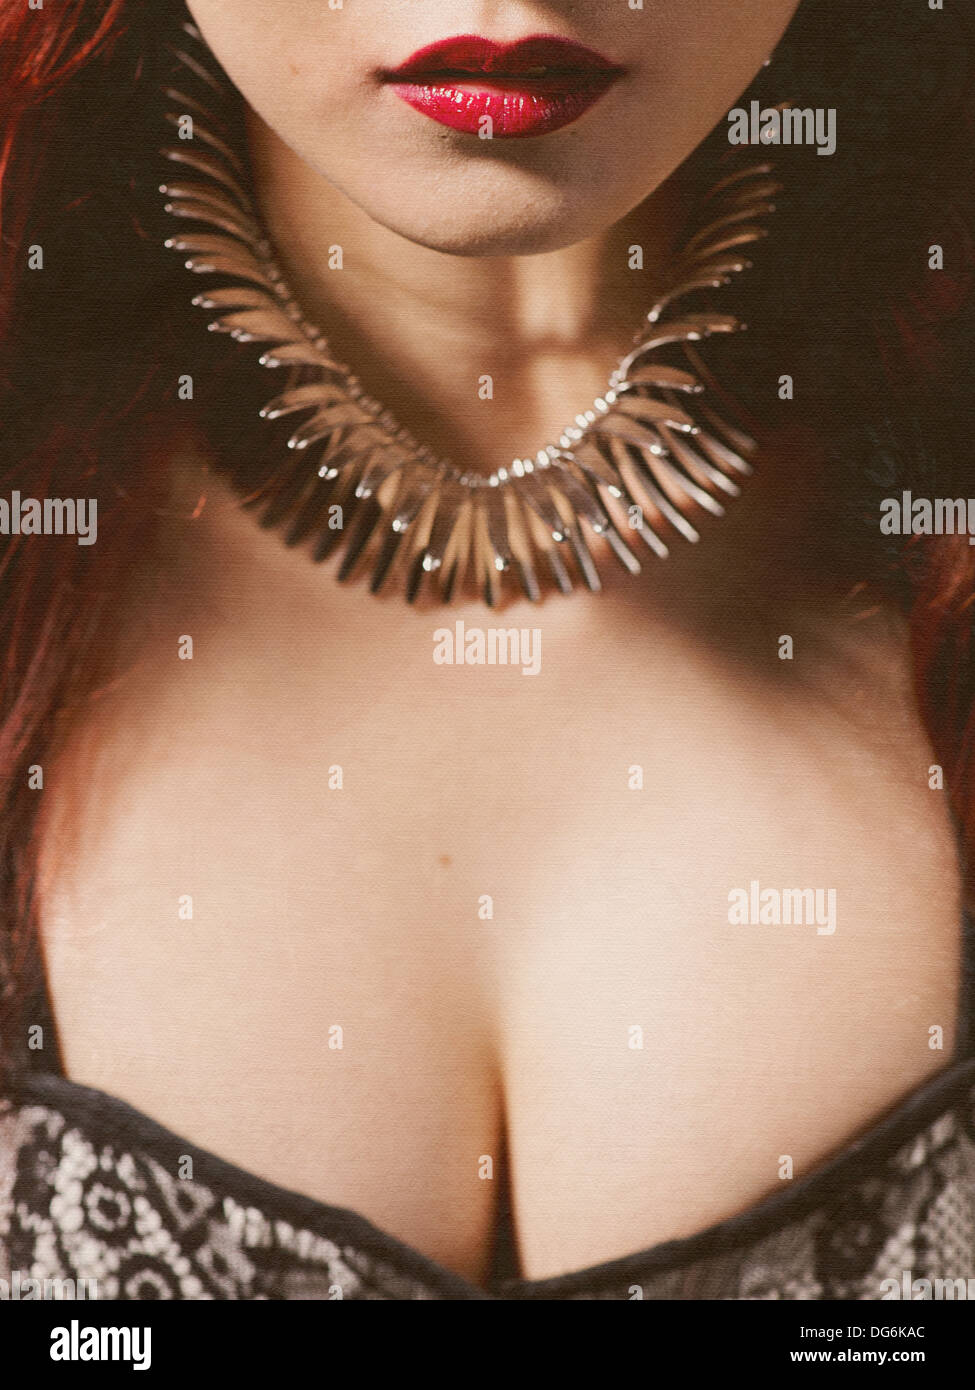 Lady with red hair, cherry red lips, spiky jewellery and exposed cleavage. Stock Photo